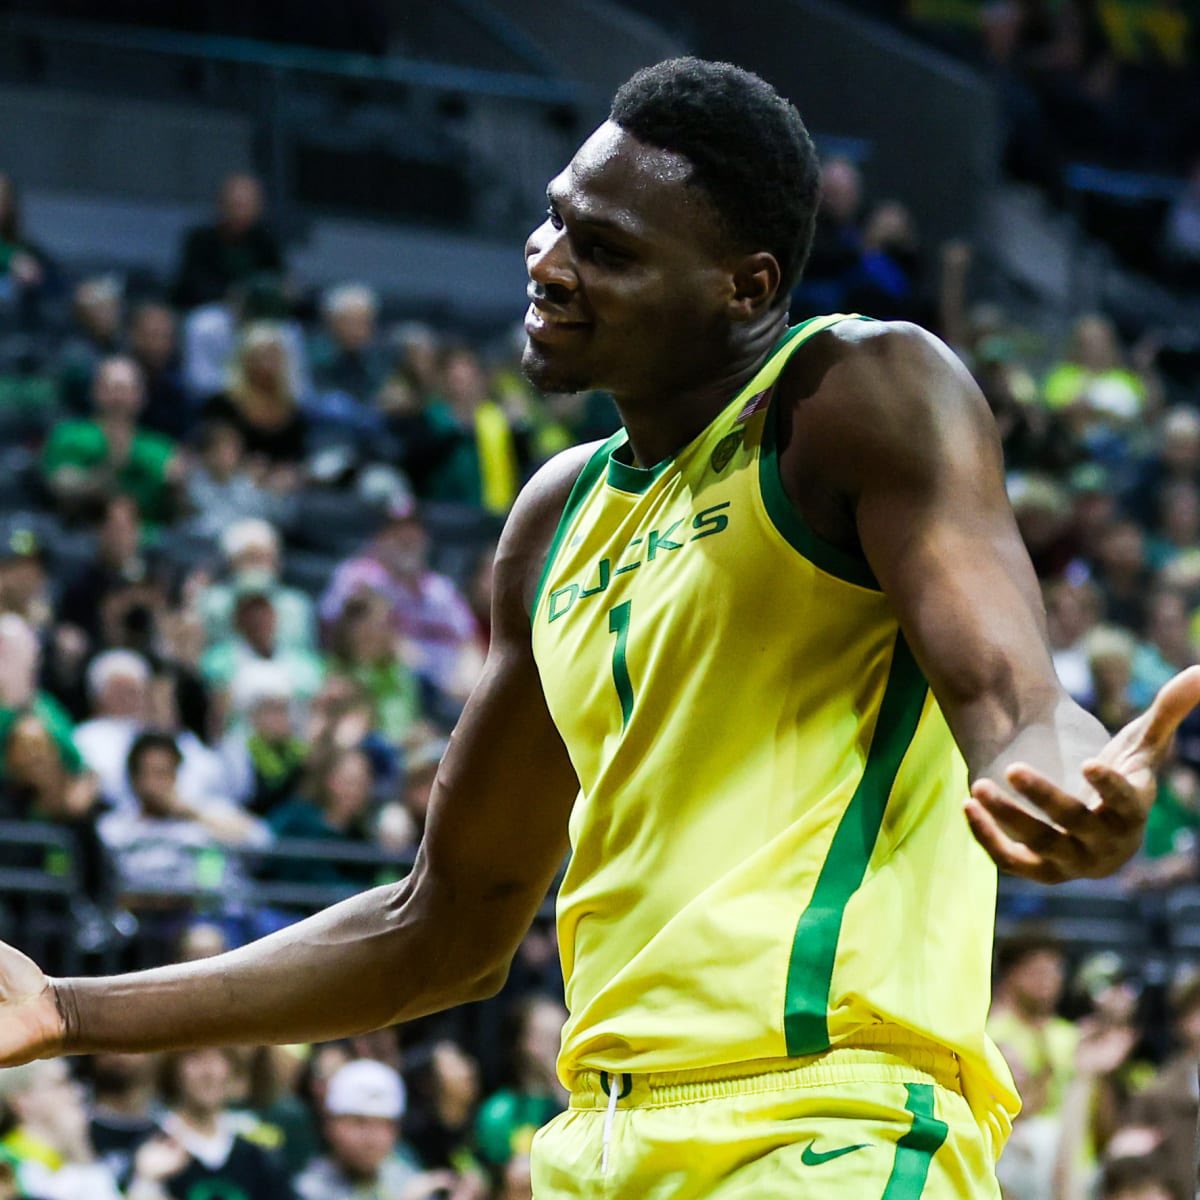 CBB Play 🏀

Oregon ML (ESPN -135) 

Rolling with the Ducks today who are red hot right now and coming into the tournament with momentum. I think Dante is a matchup problem for South Carolina and he will dominate this game.

#CBBPicks #MarchMadness #FanDuel